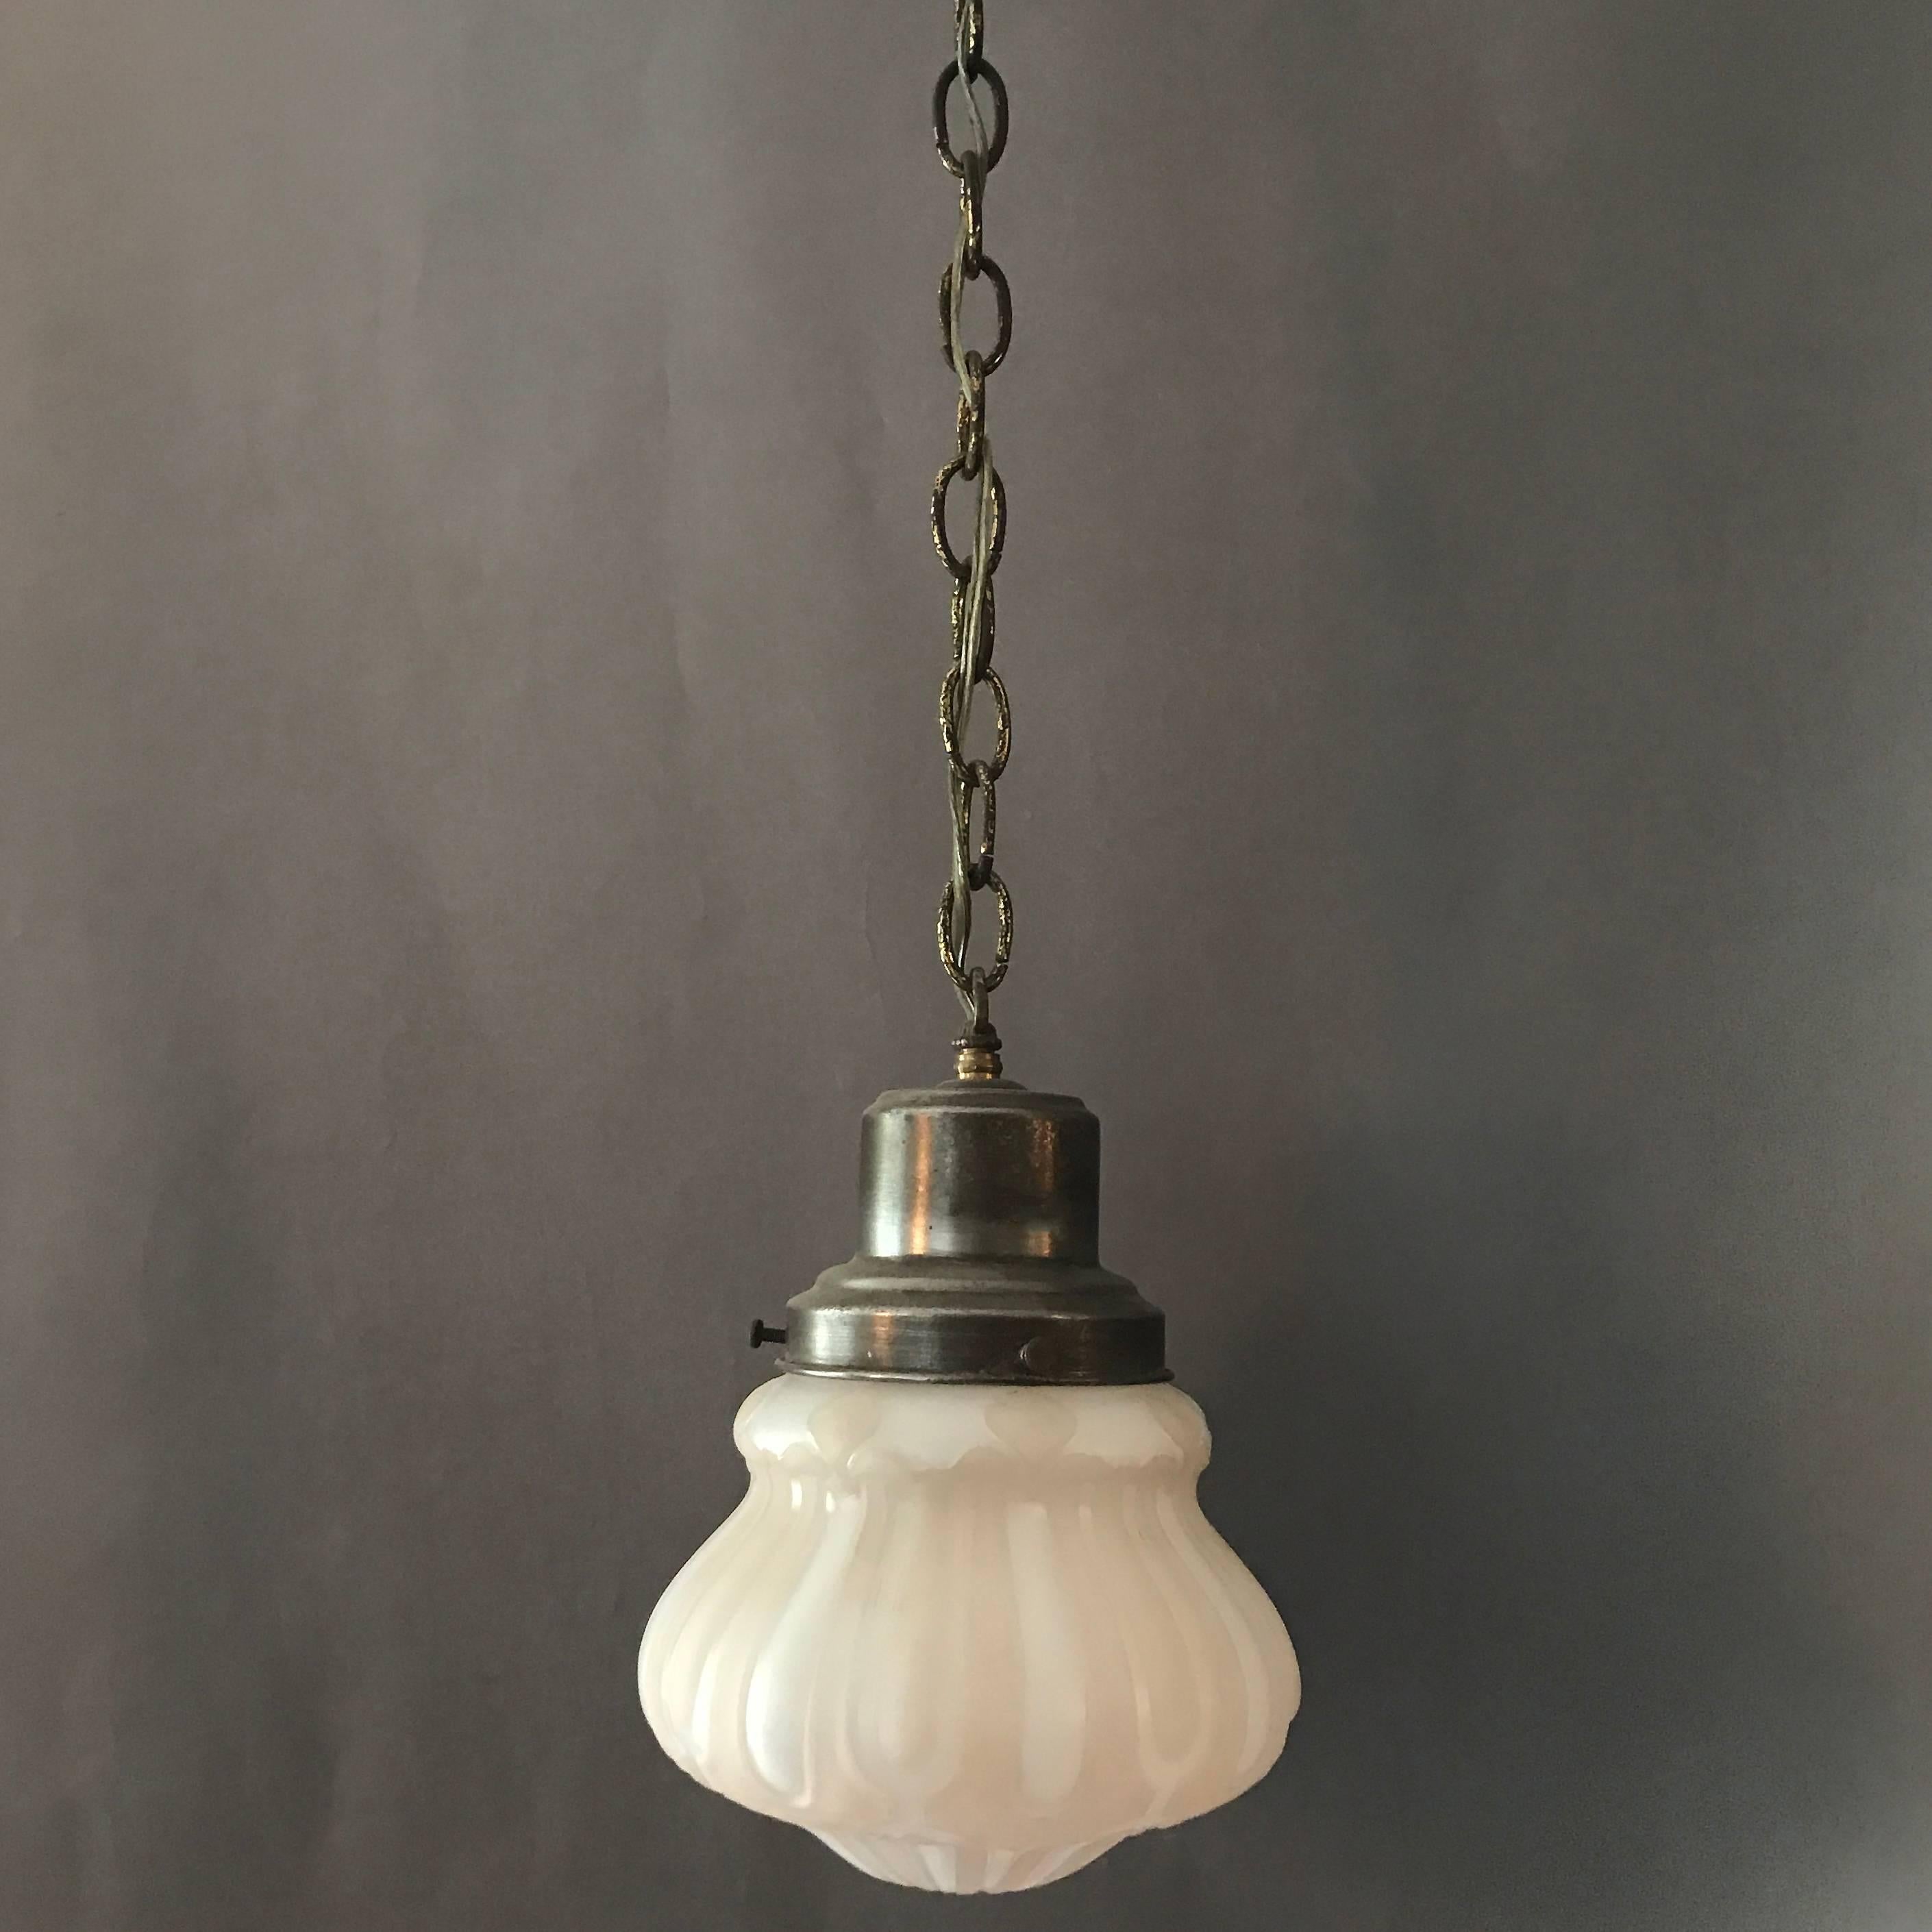 1930s, Industrial, Art Deco, library pendant light features a blush pink and white, painted, pressed glass shade with brass fitter, chain and canopy. Overall height is 28 in.